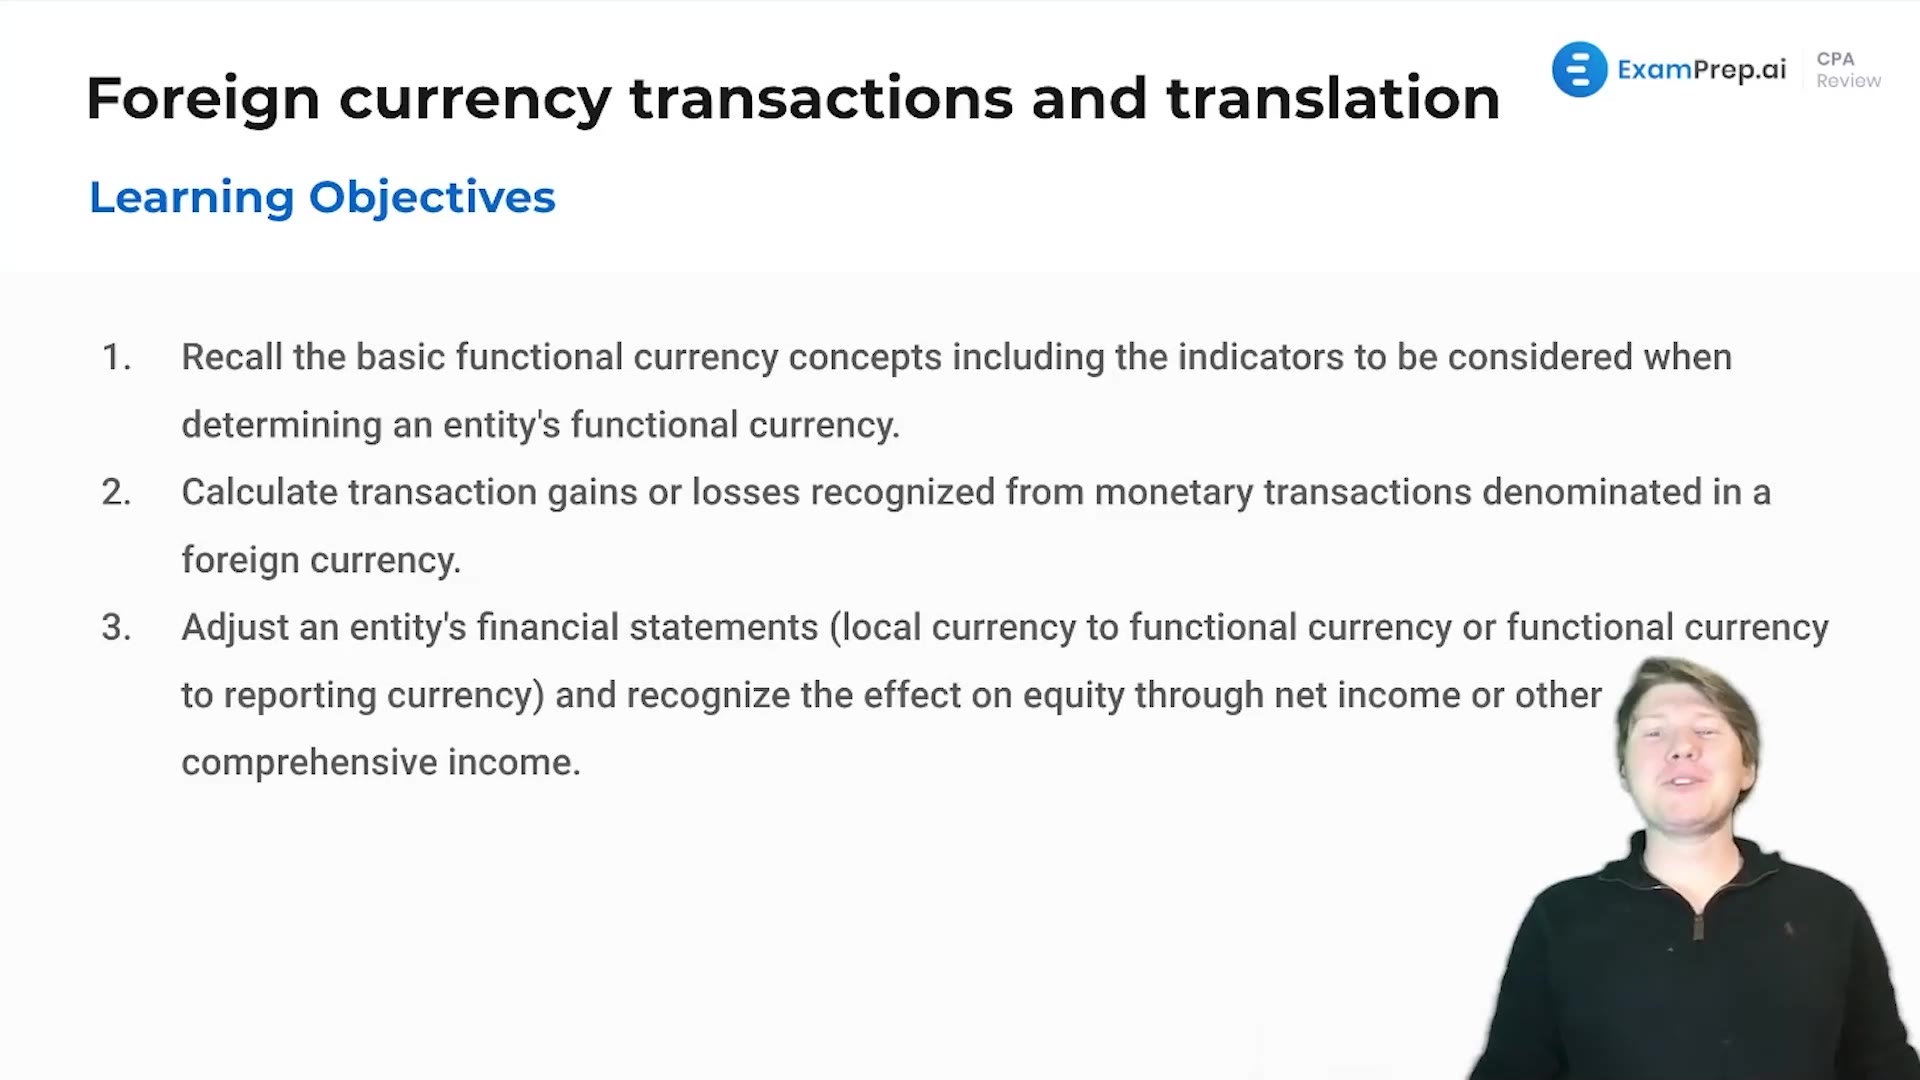 Foreign Currency Transactions and Translation Overview and Objectives lesson thumbnail